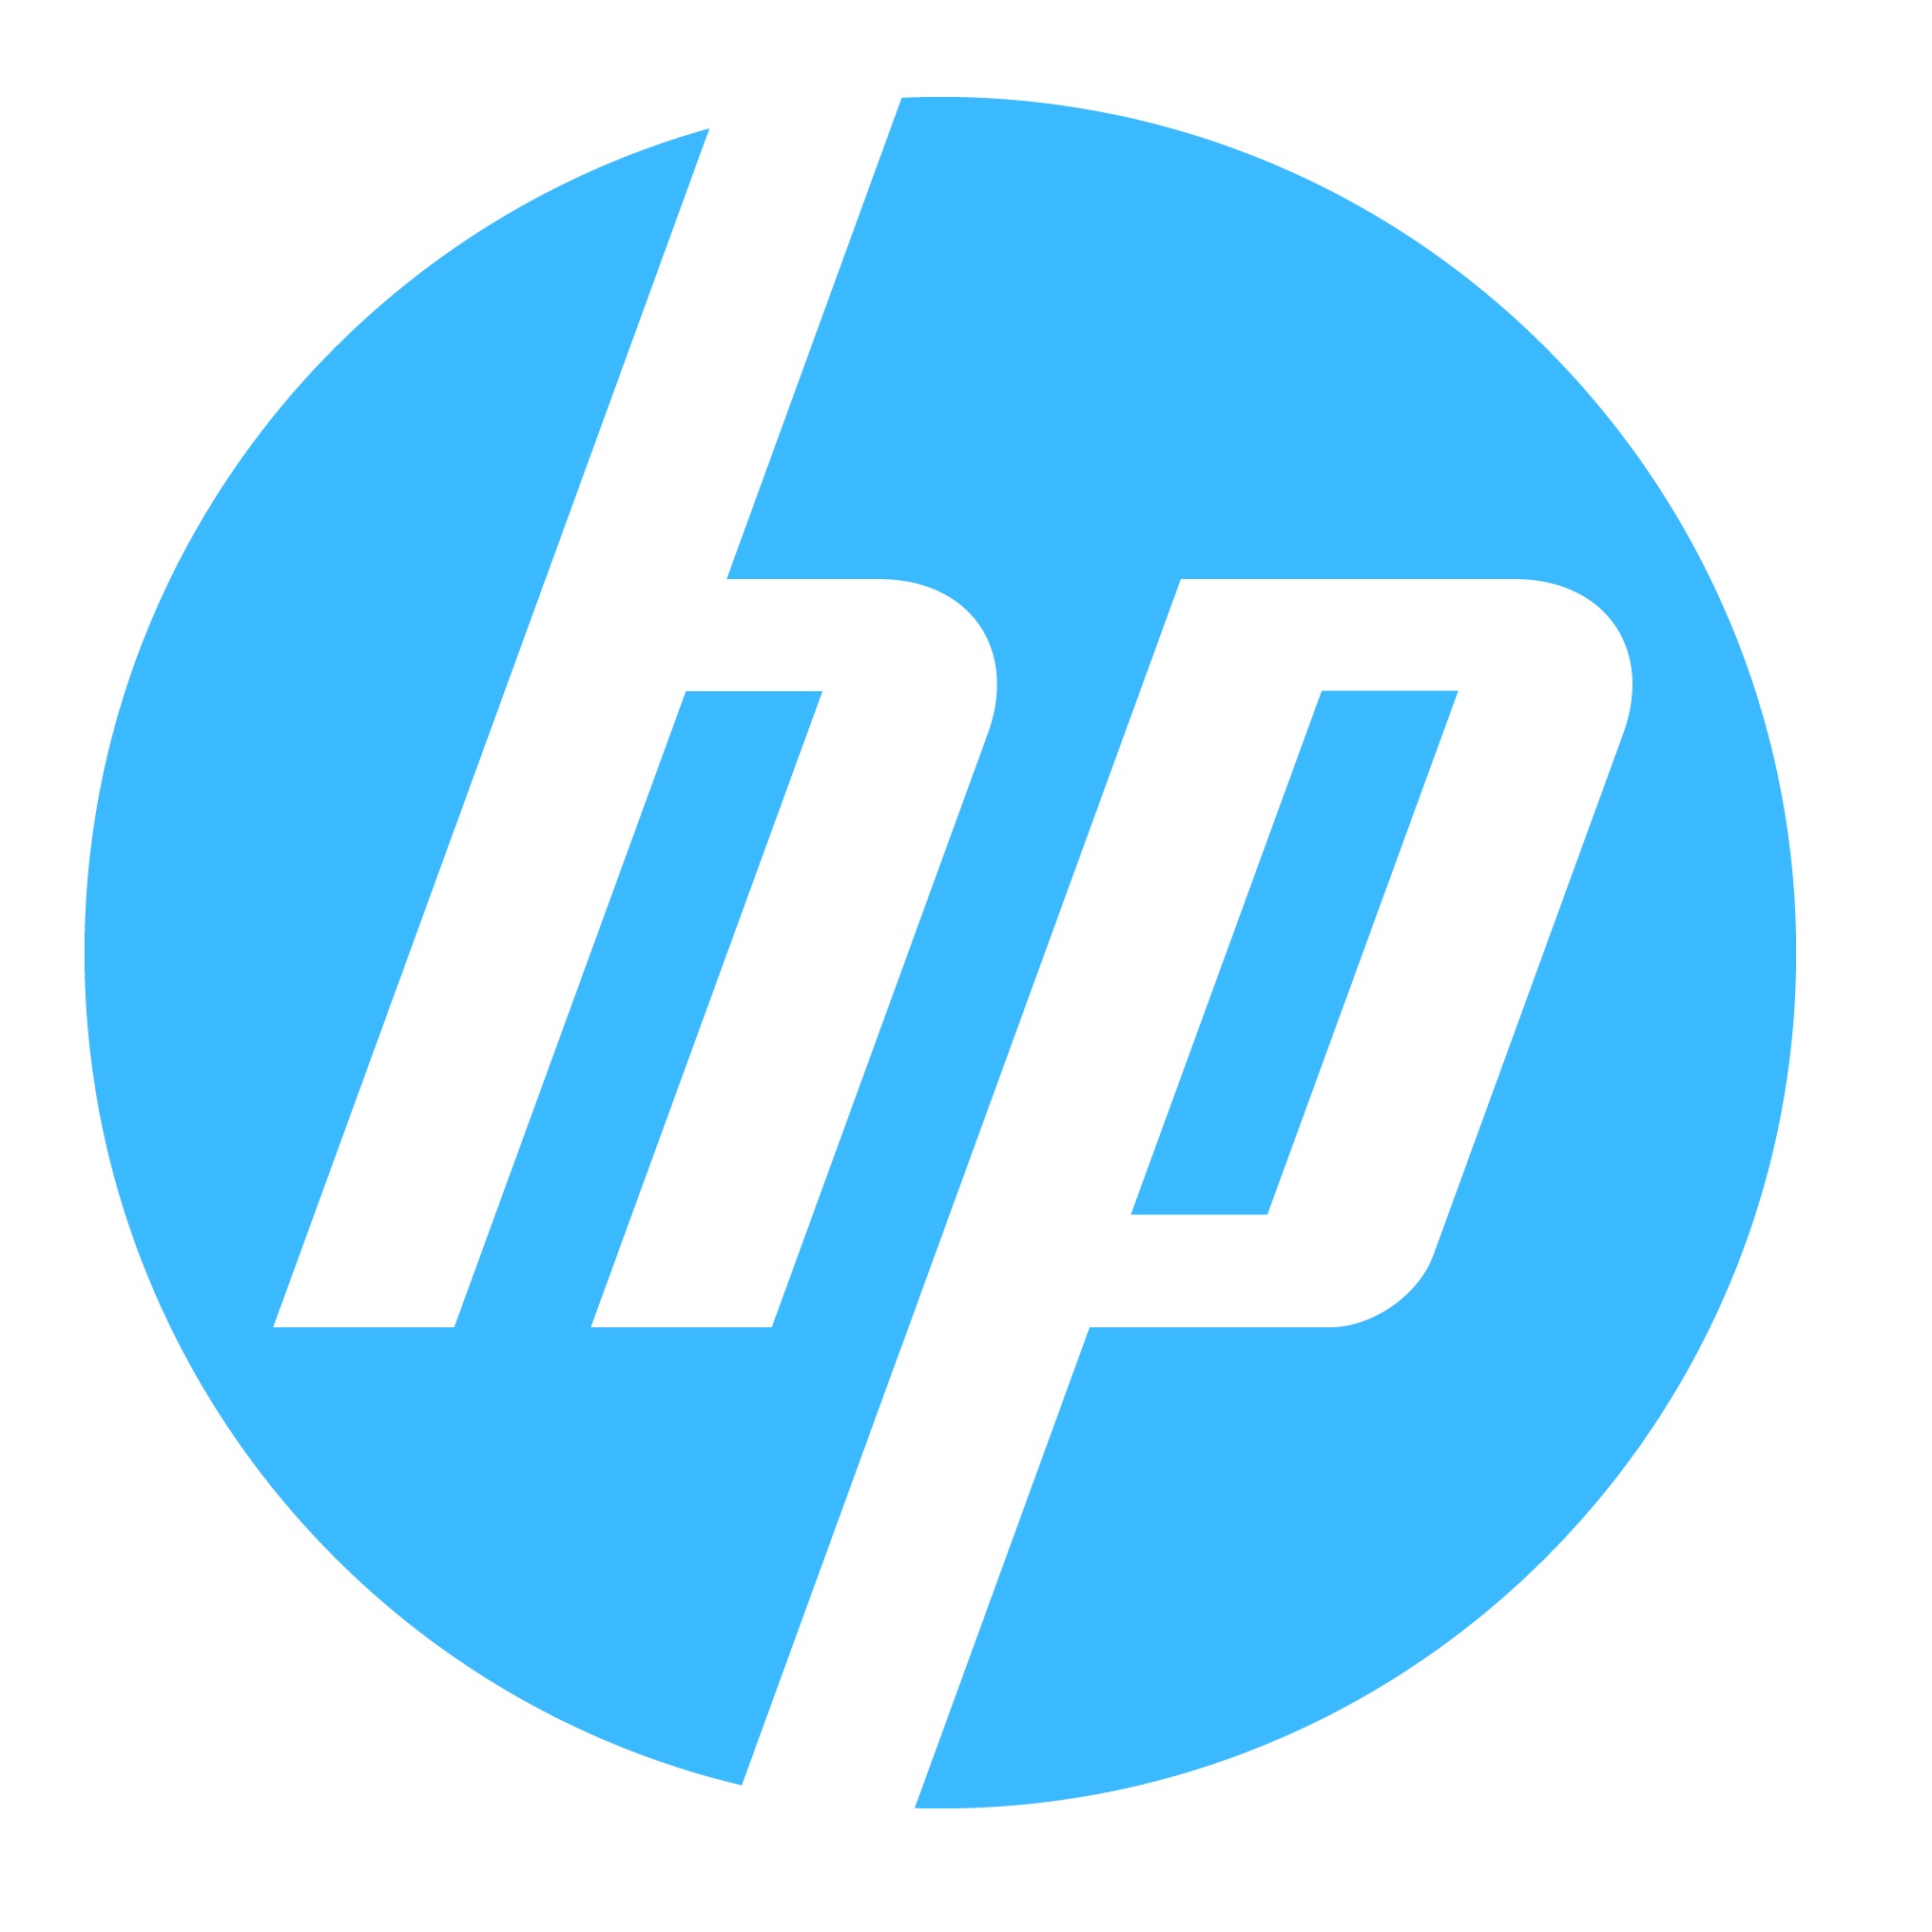 Amazing Hewlett-Packard Pictures & Backgrounds